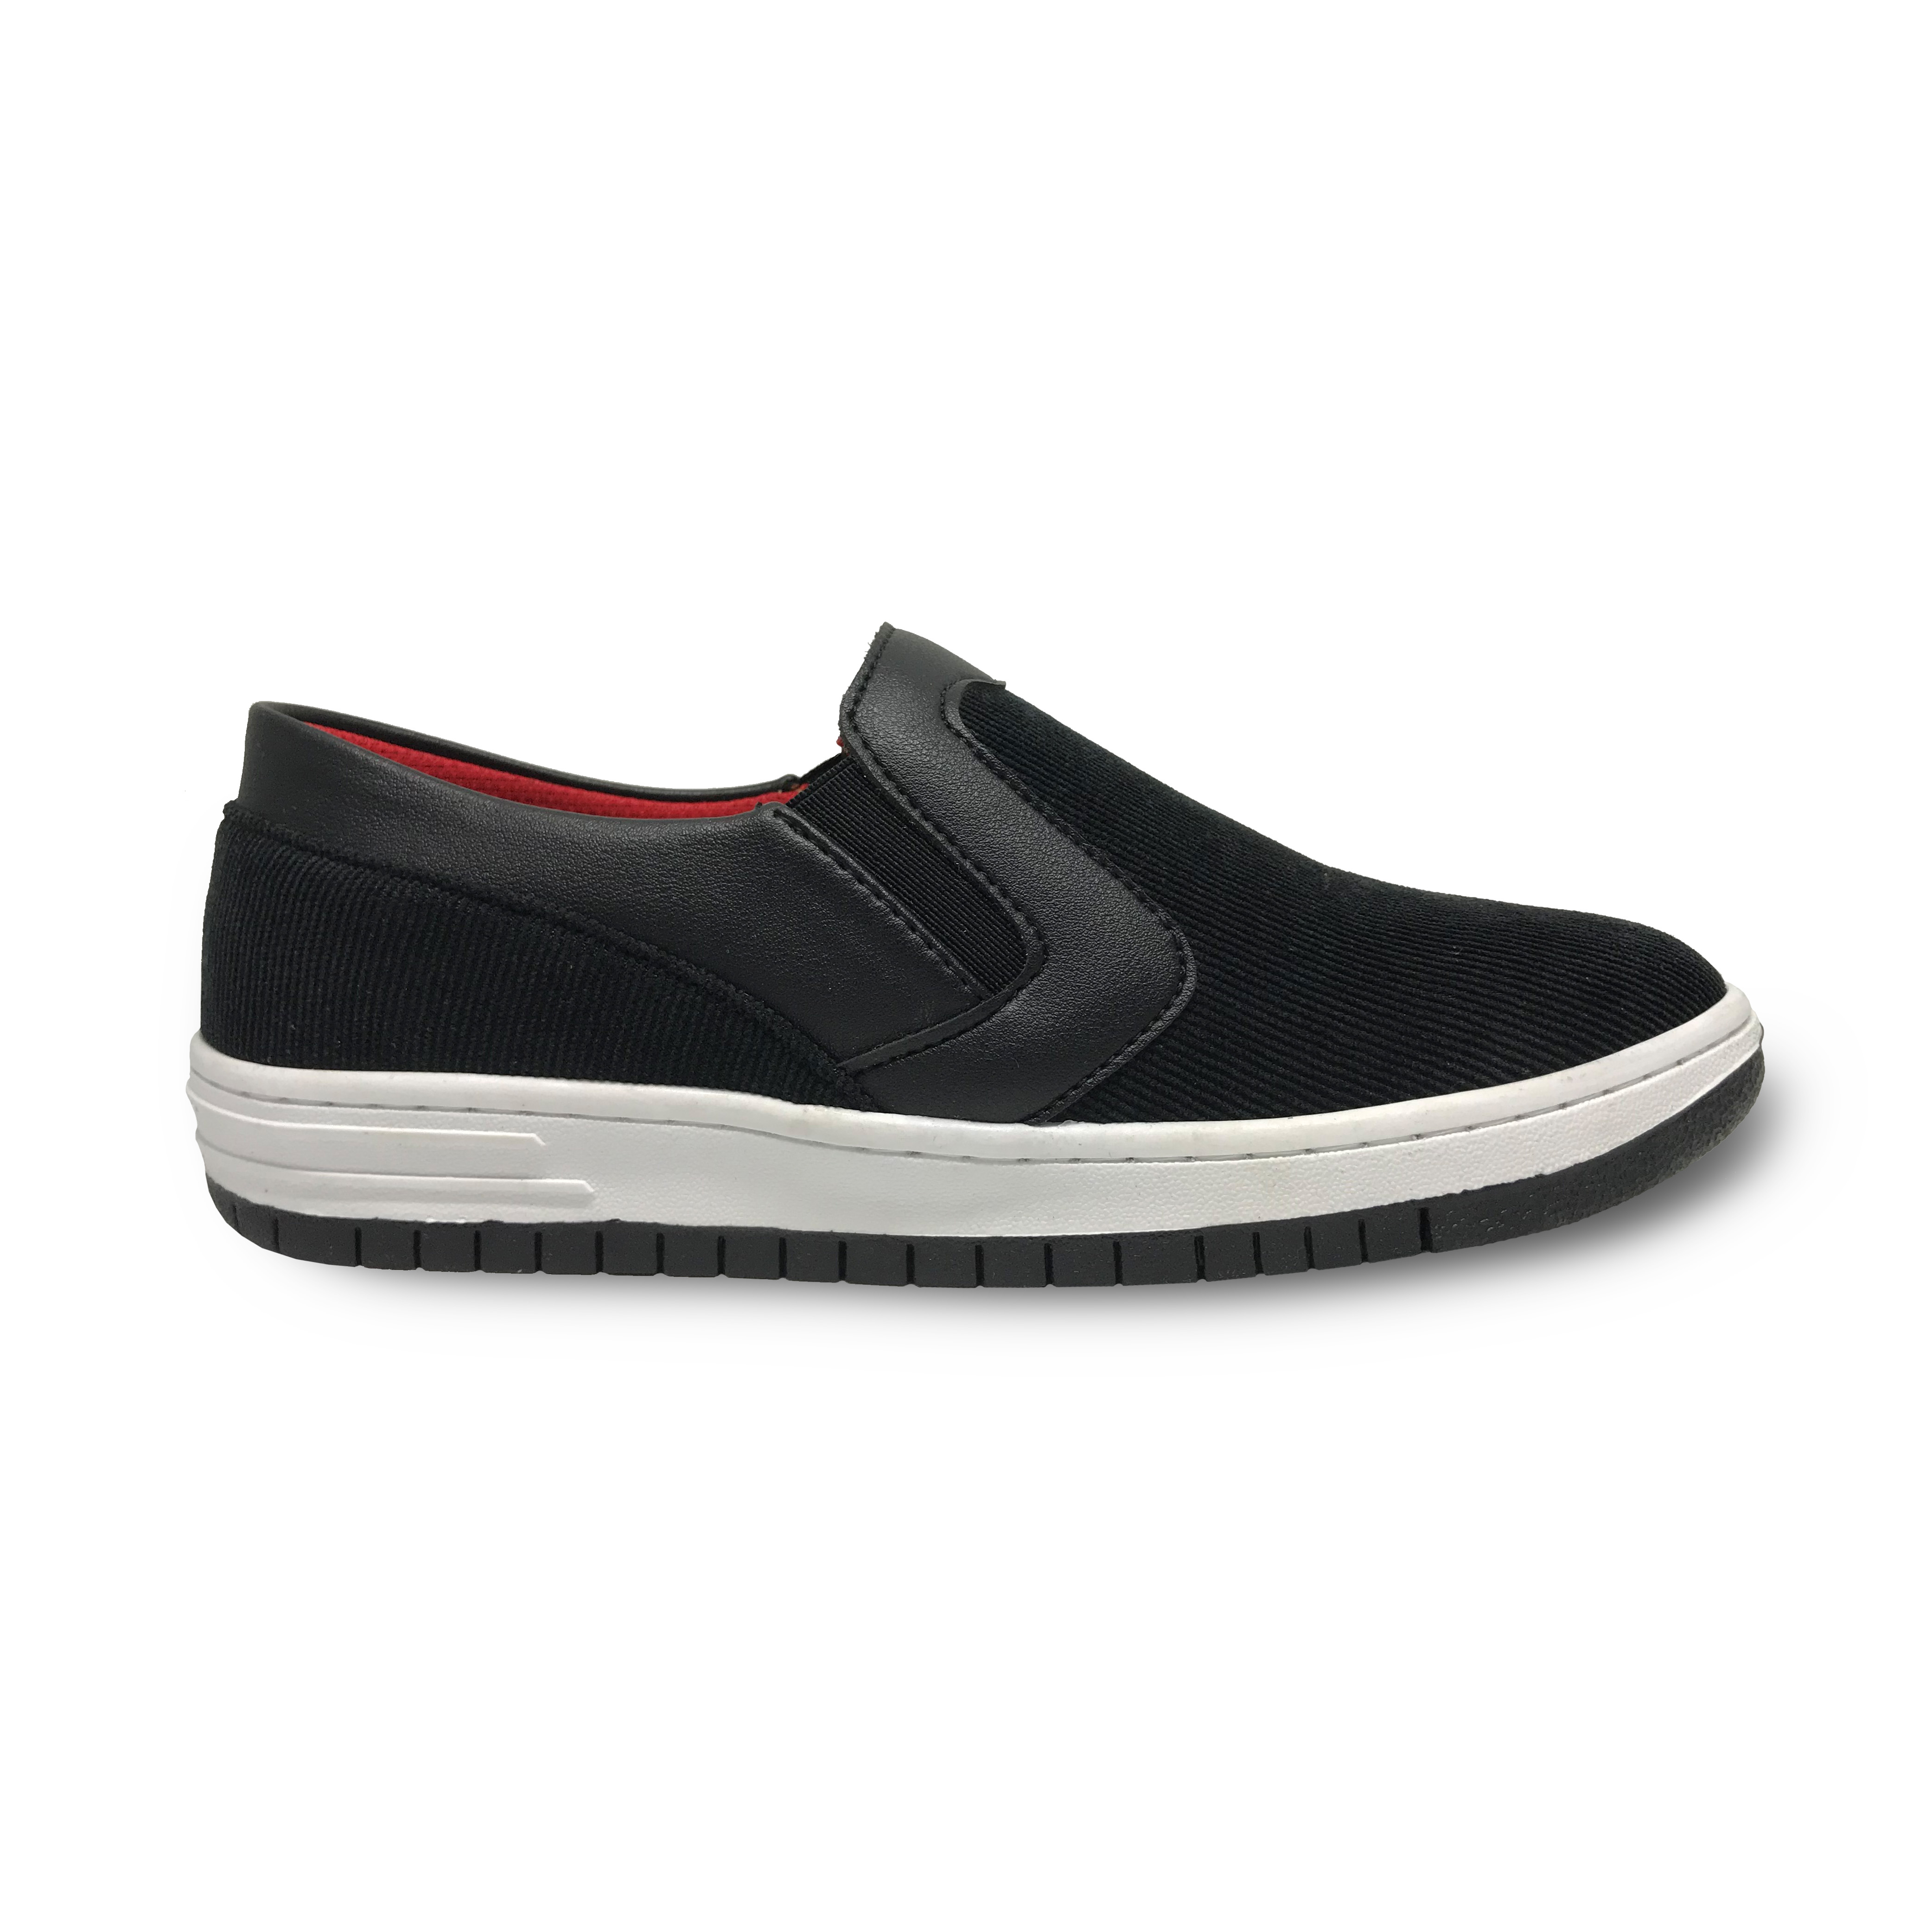 Bata Black Casual Shoes for Men – Casual Day 